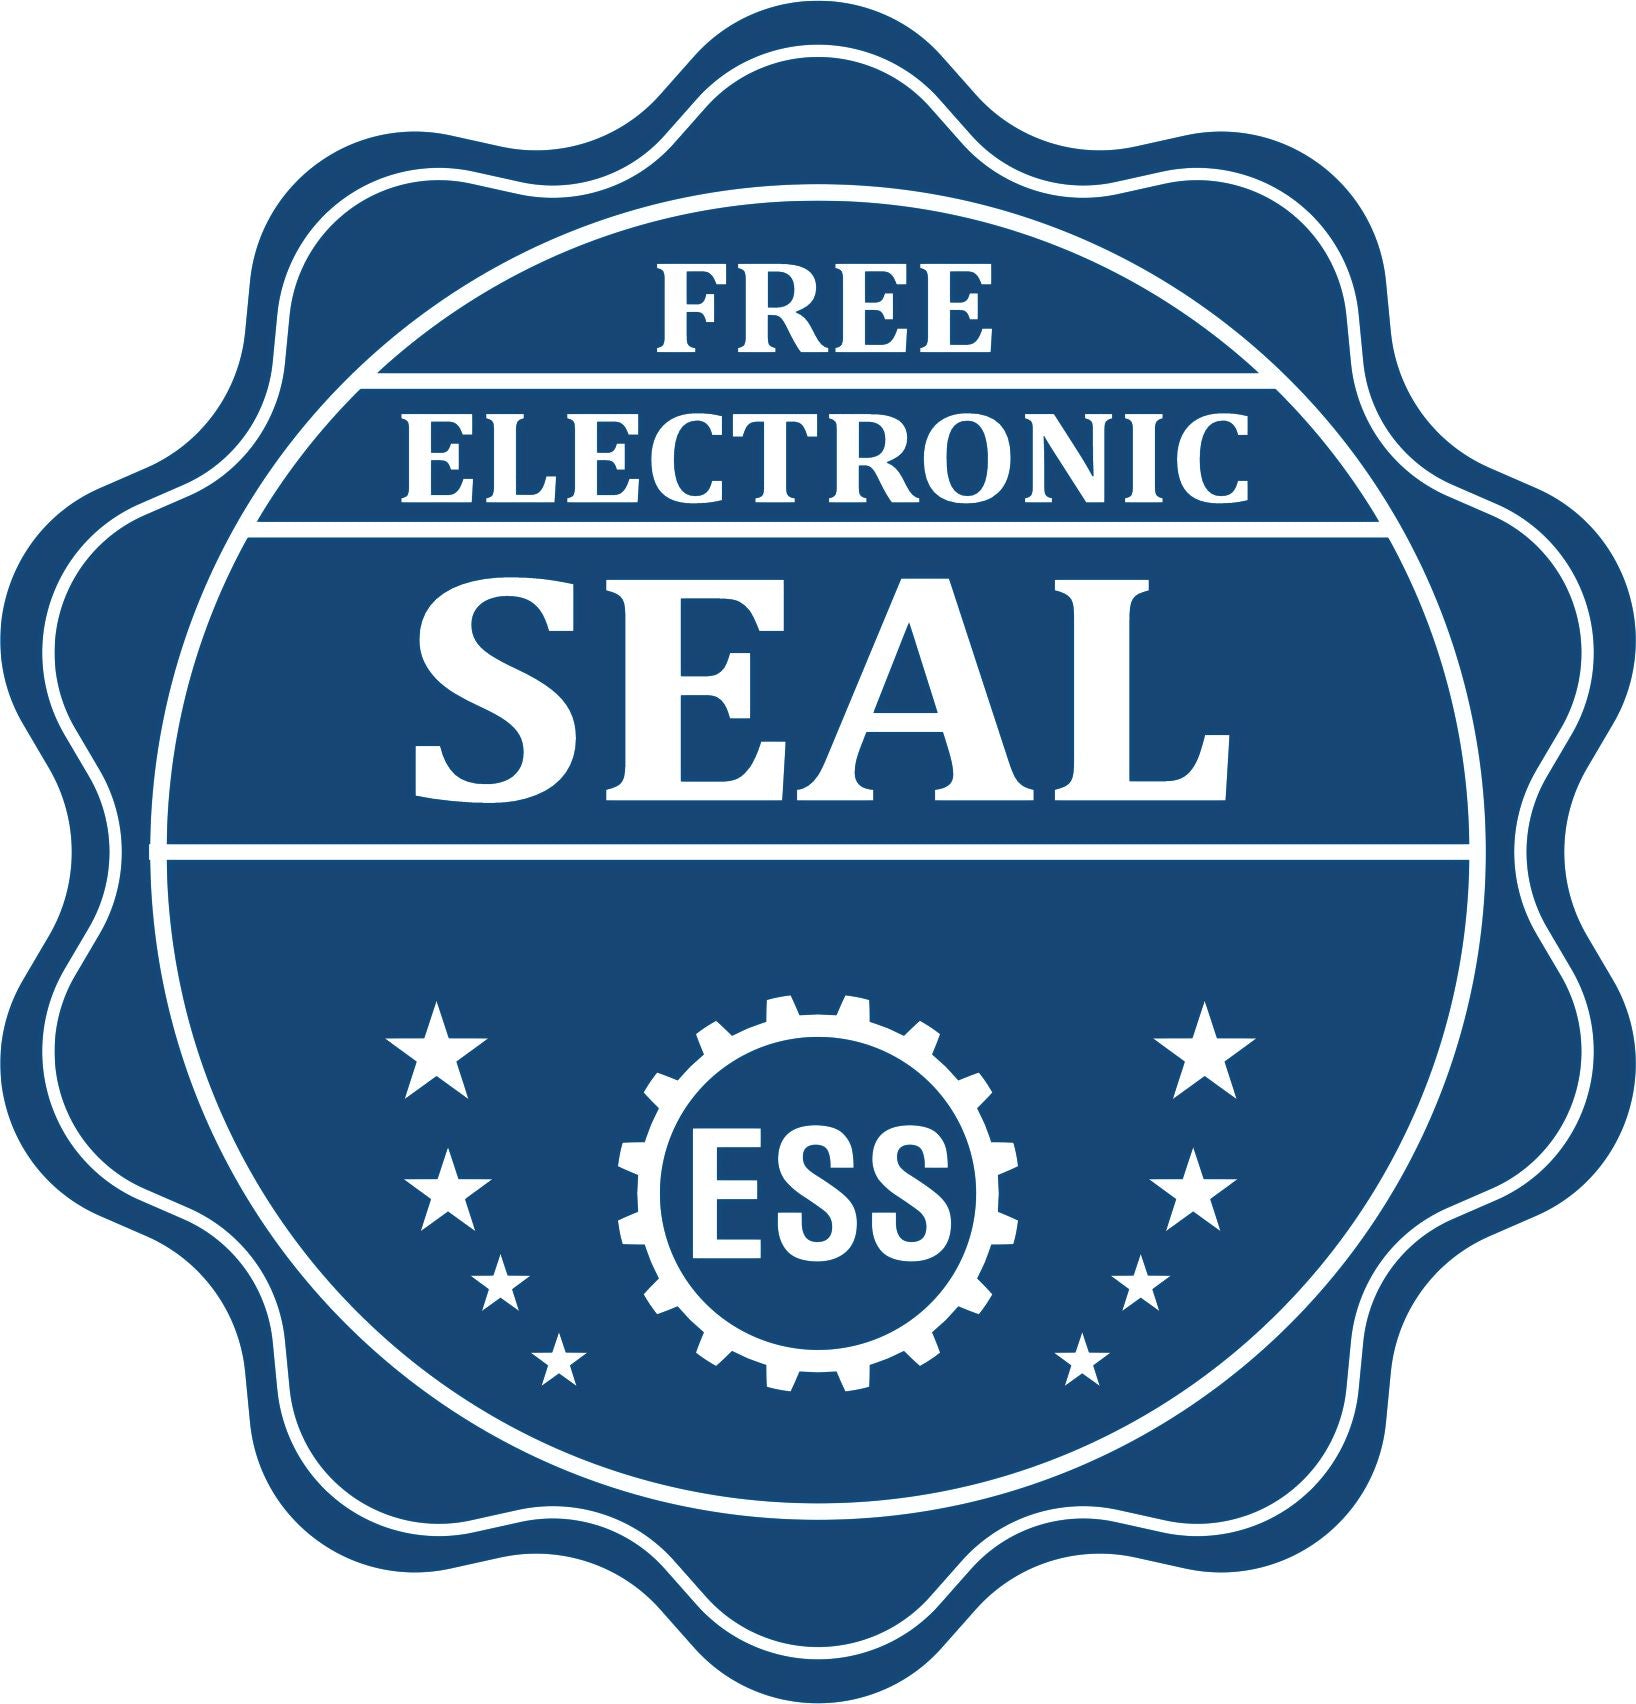 A badge showing a free electronic seal for the Premium MaxLight Pre-Inked Texas Landscape Architectural Stamp with stars and the ESS gear on the emblem.